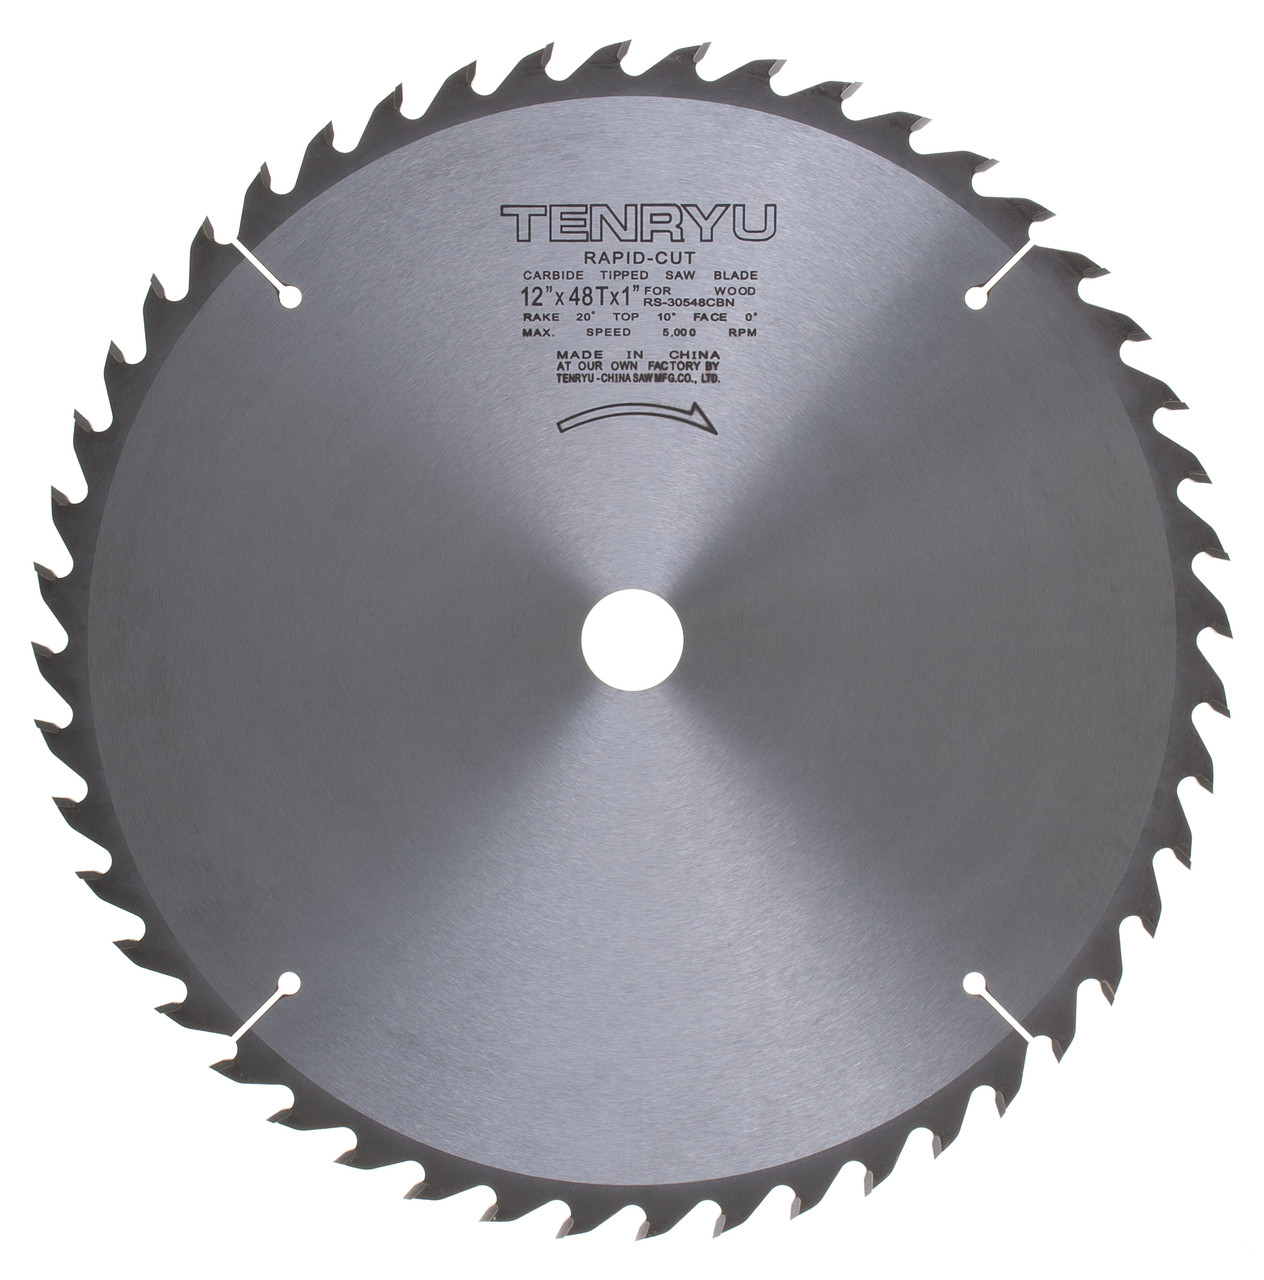 Tenryu RS-30548CBN 12" Carbide Tipped Saw Blade (48 Tooth ATB Grind 1" Arbor 0.134 Kerf) - 1